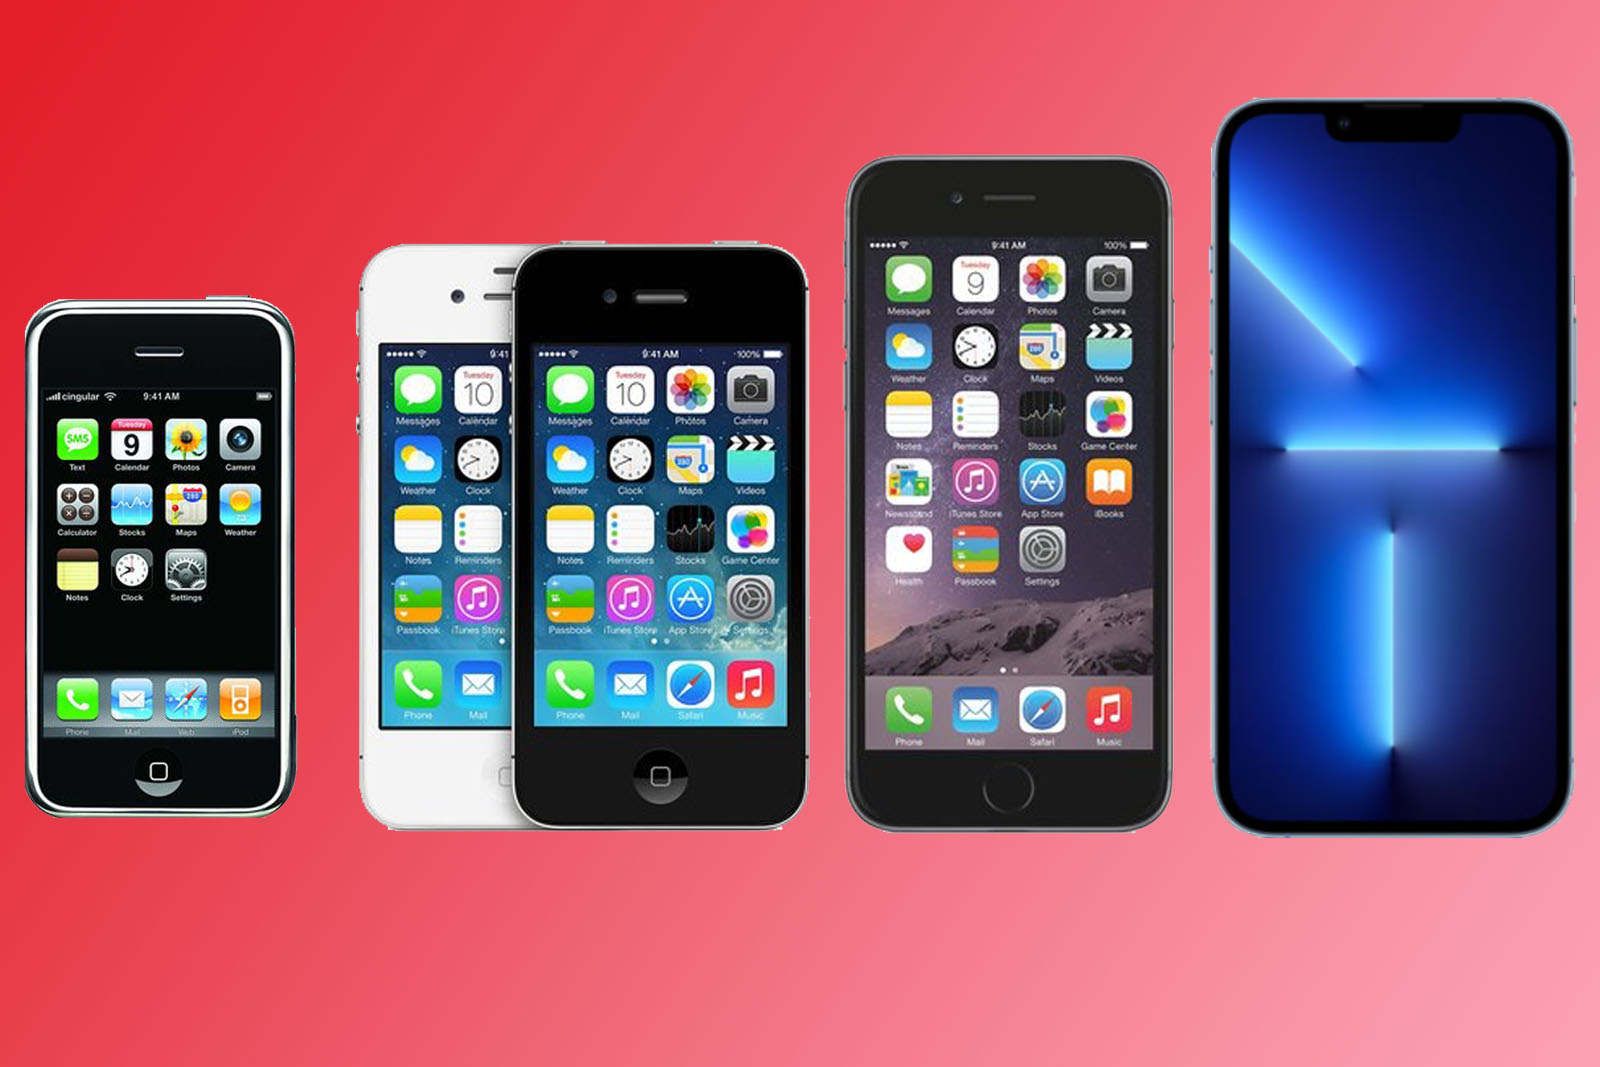 Apple iPhone history: Look how much the iPhone has changed